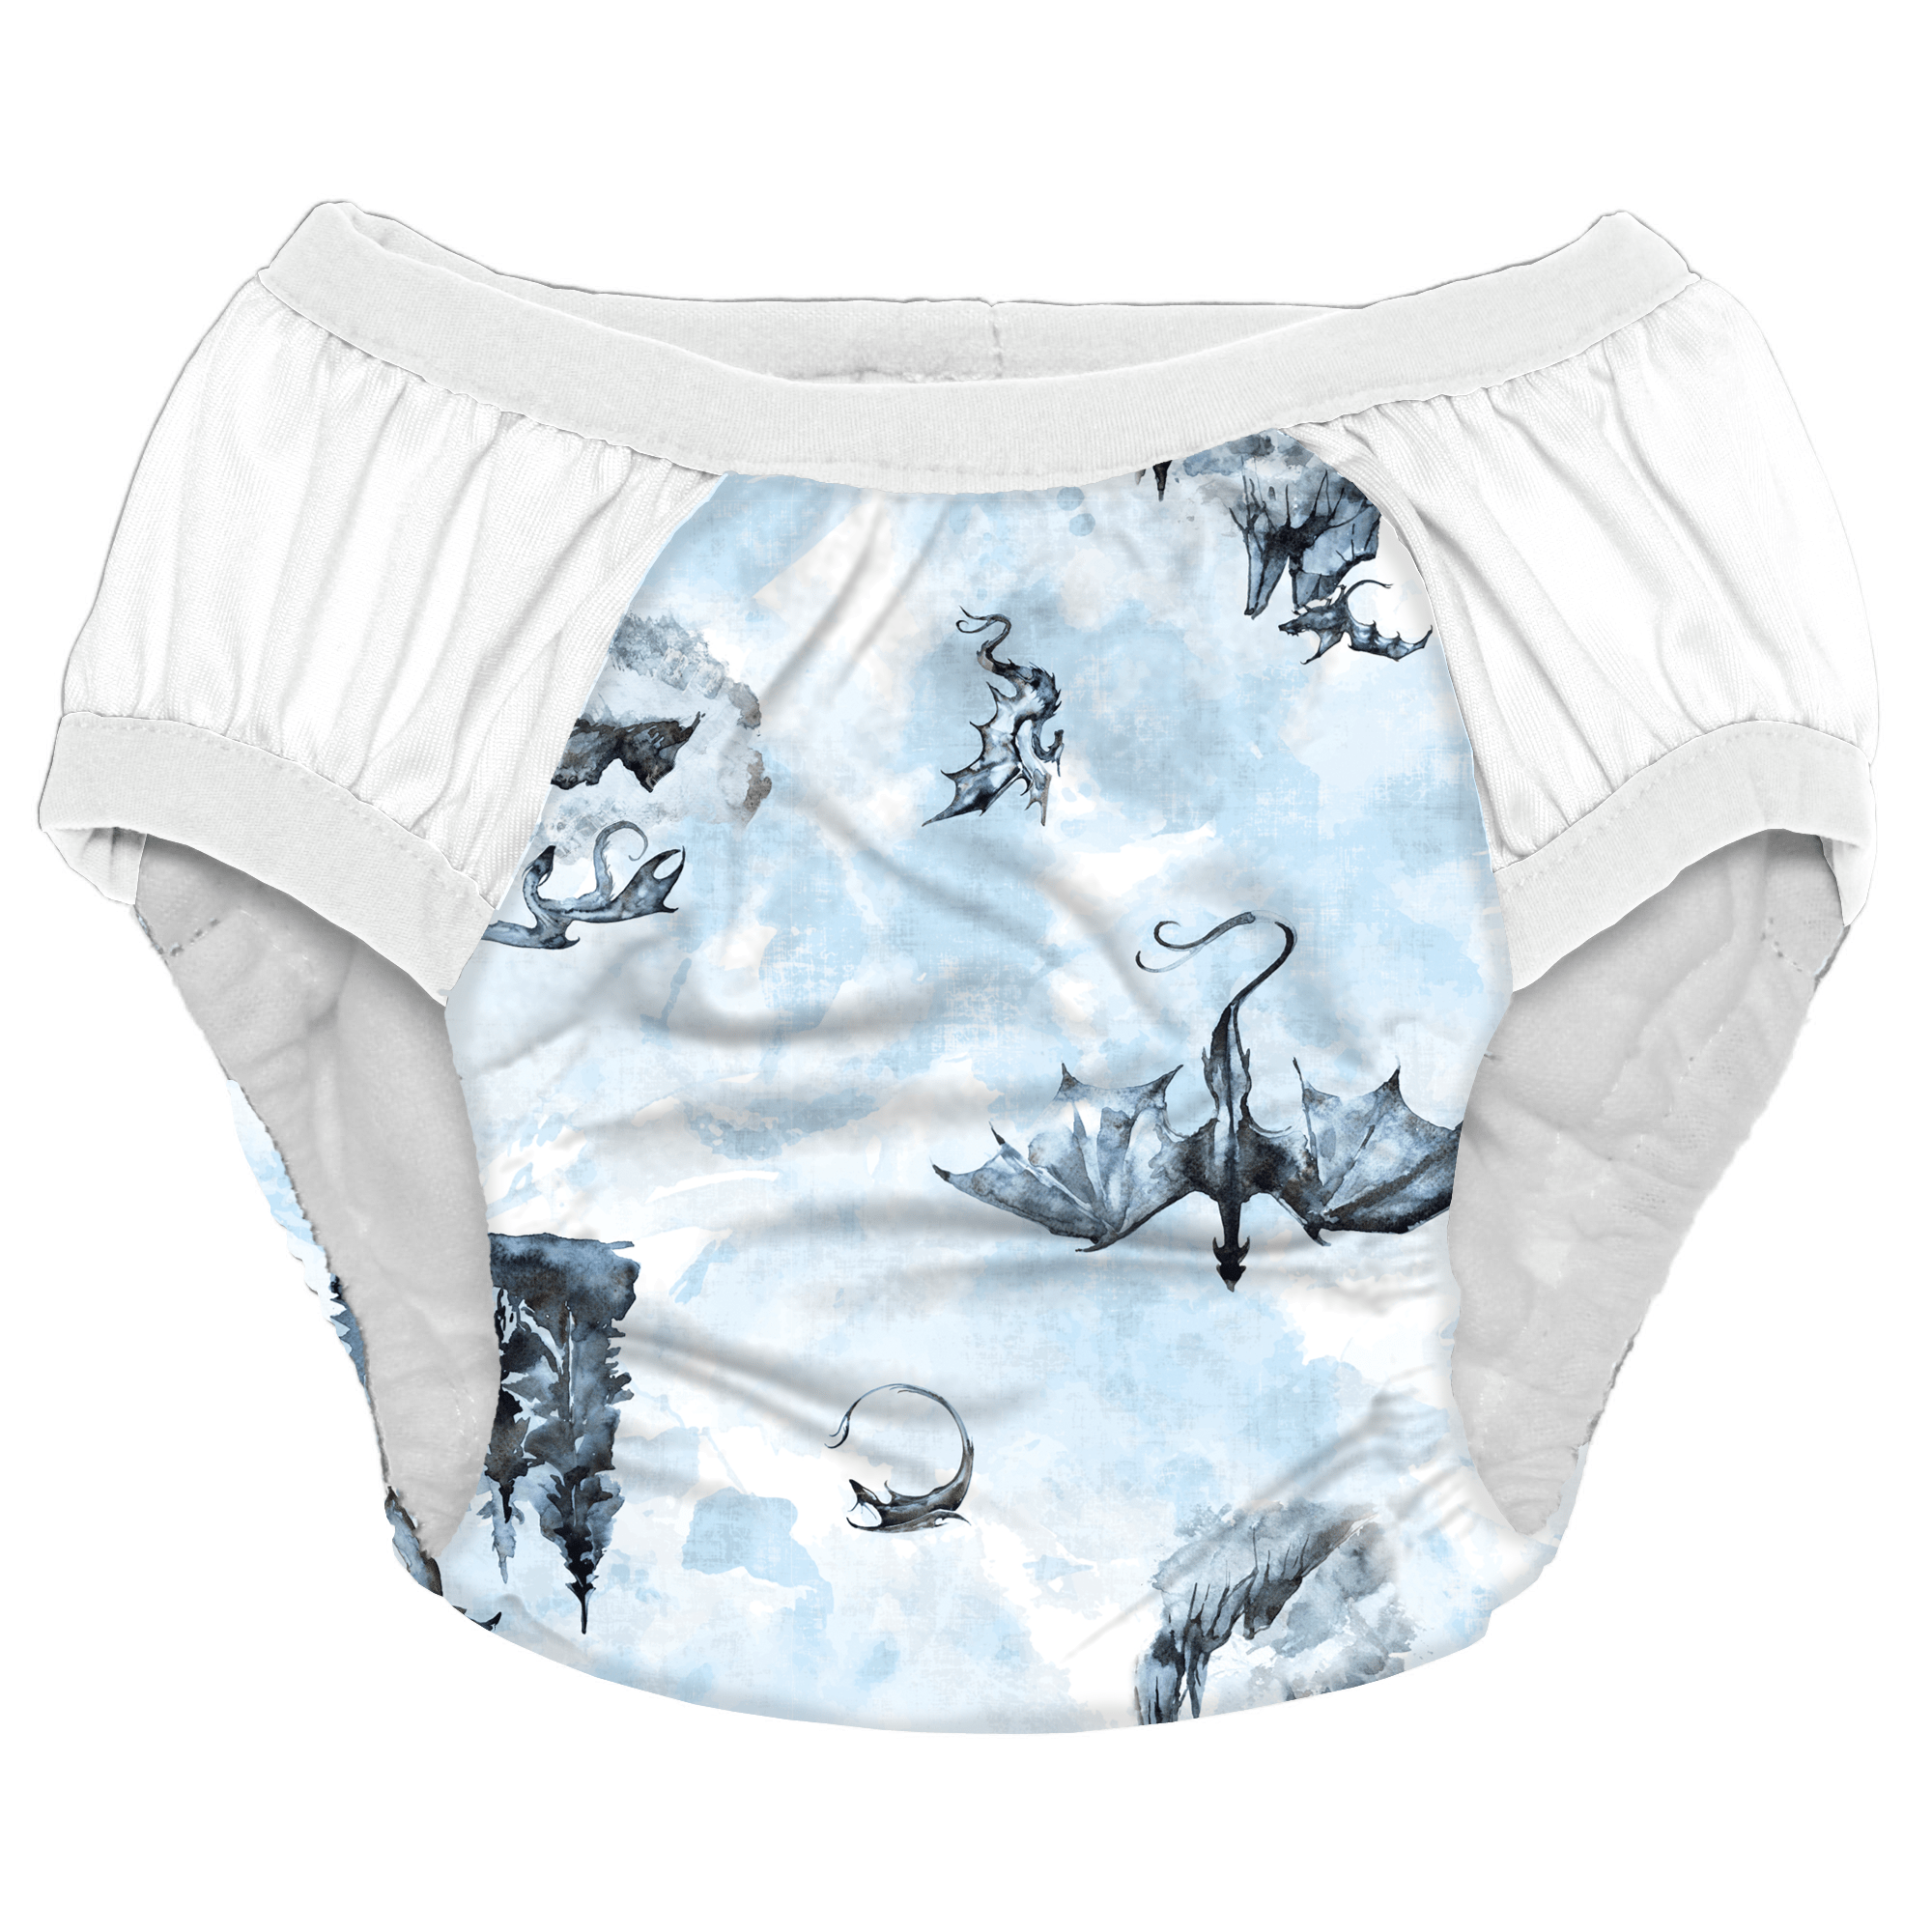 Cloth Training Pants - Bambino Mio Training Pants - Cloth Pull Ups - Cloth  Diapers - Training Underwear - Potty Training - Potty Learning - Toddlers -  Simply Mom Bailey